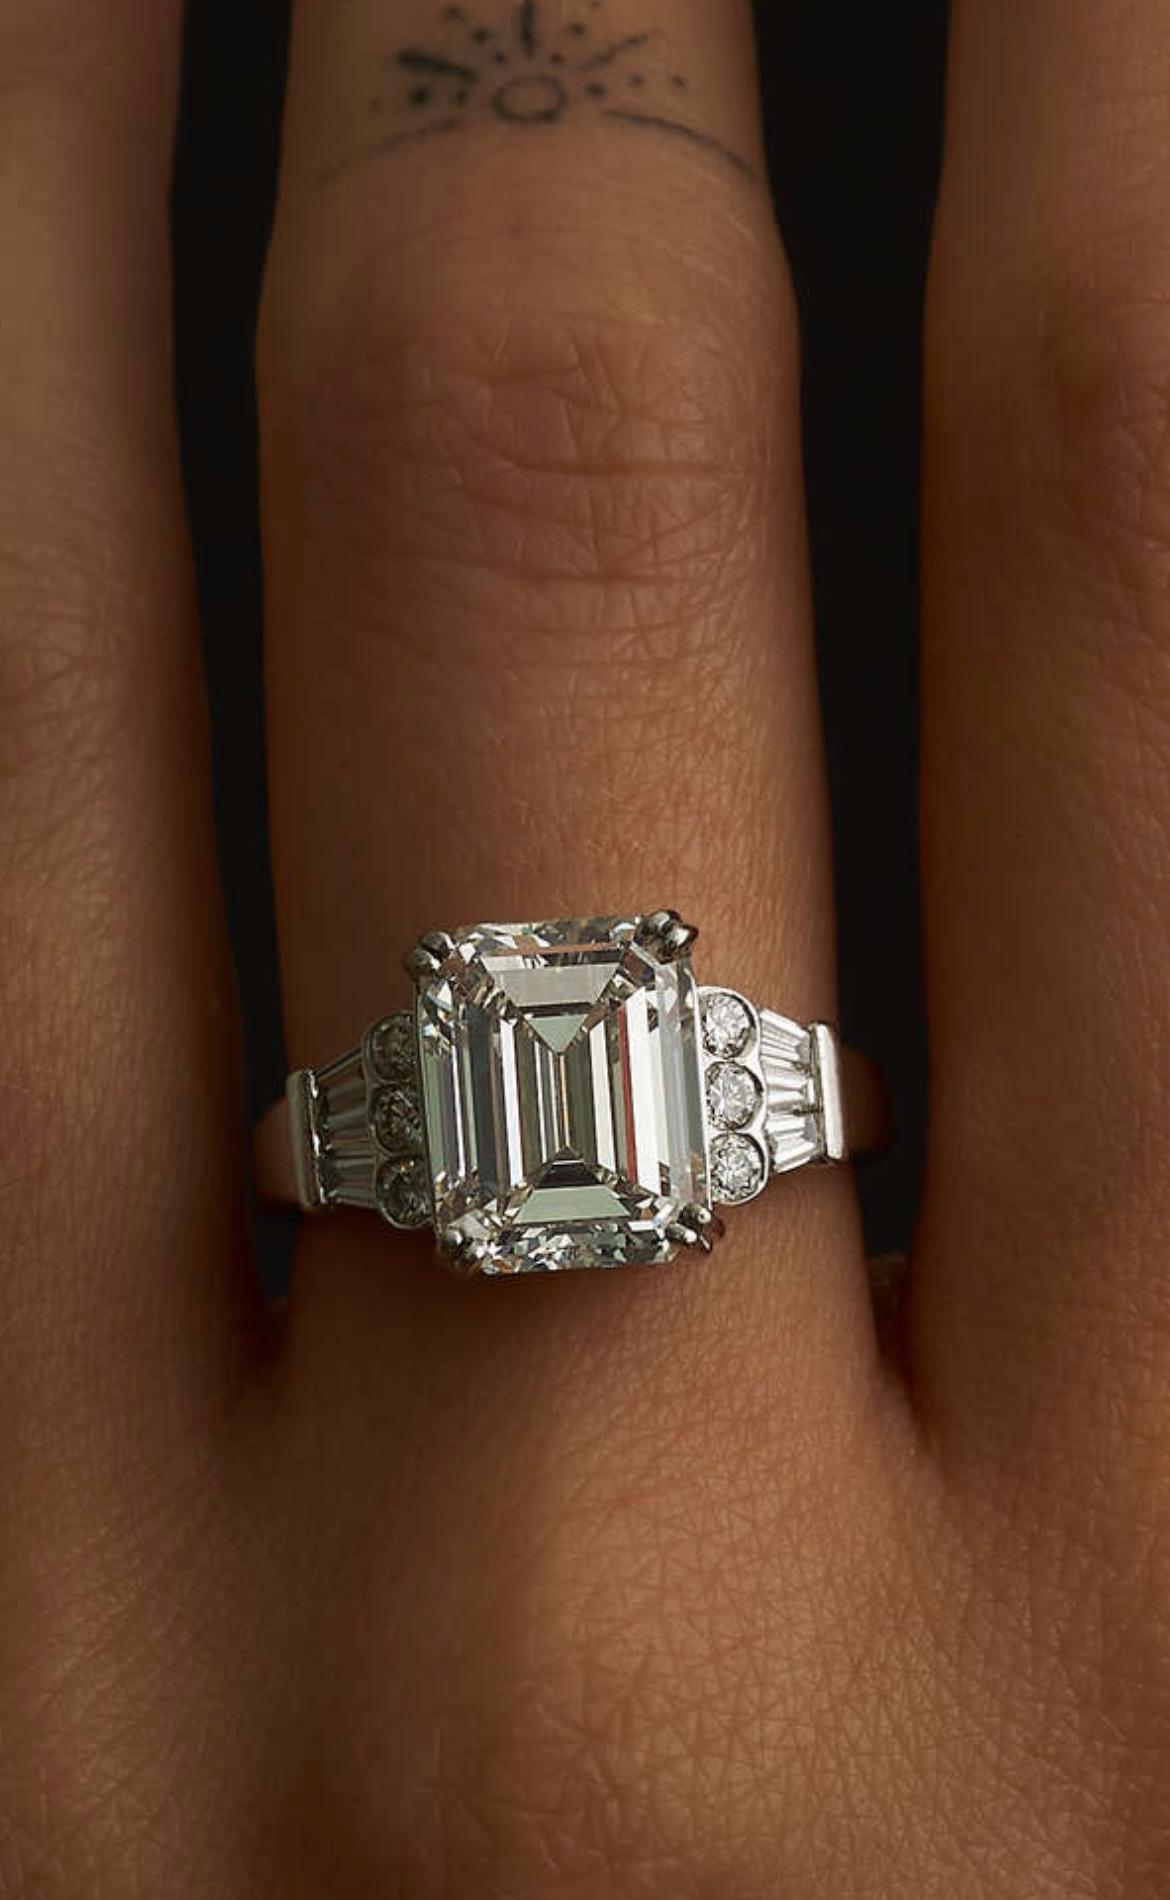 A 5.15 CARAT H COLOUR, VVS2 DIAMOND ENGAGEMENT RING in 18ct white gold, set with an emerald cut diamond of 5.15 carats, accented by trios of round brilliant and tapering baguette cut diamonds, full British hallmarks, size 0 / 7.25, 5.9g. Accompanied